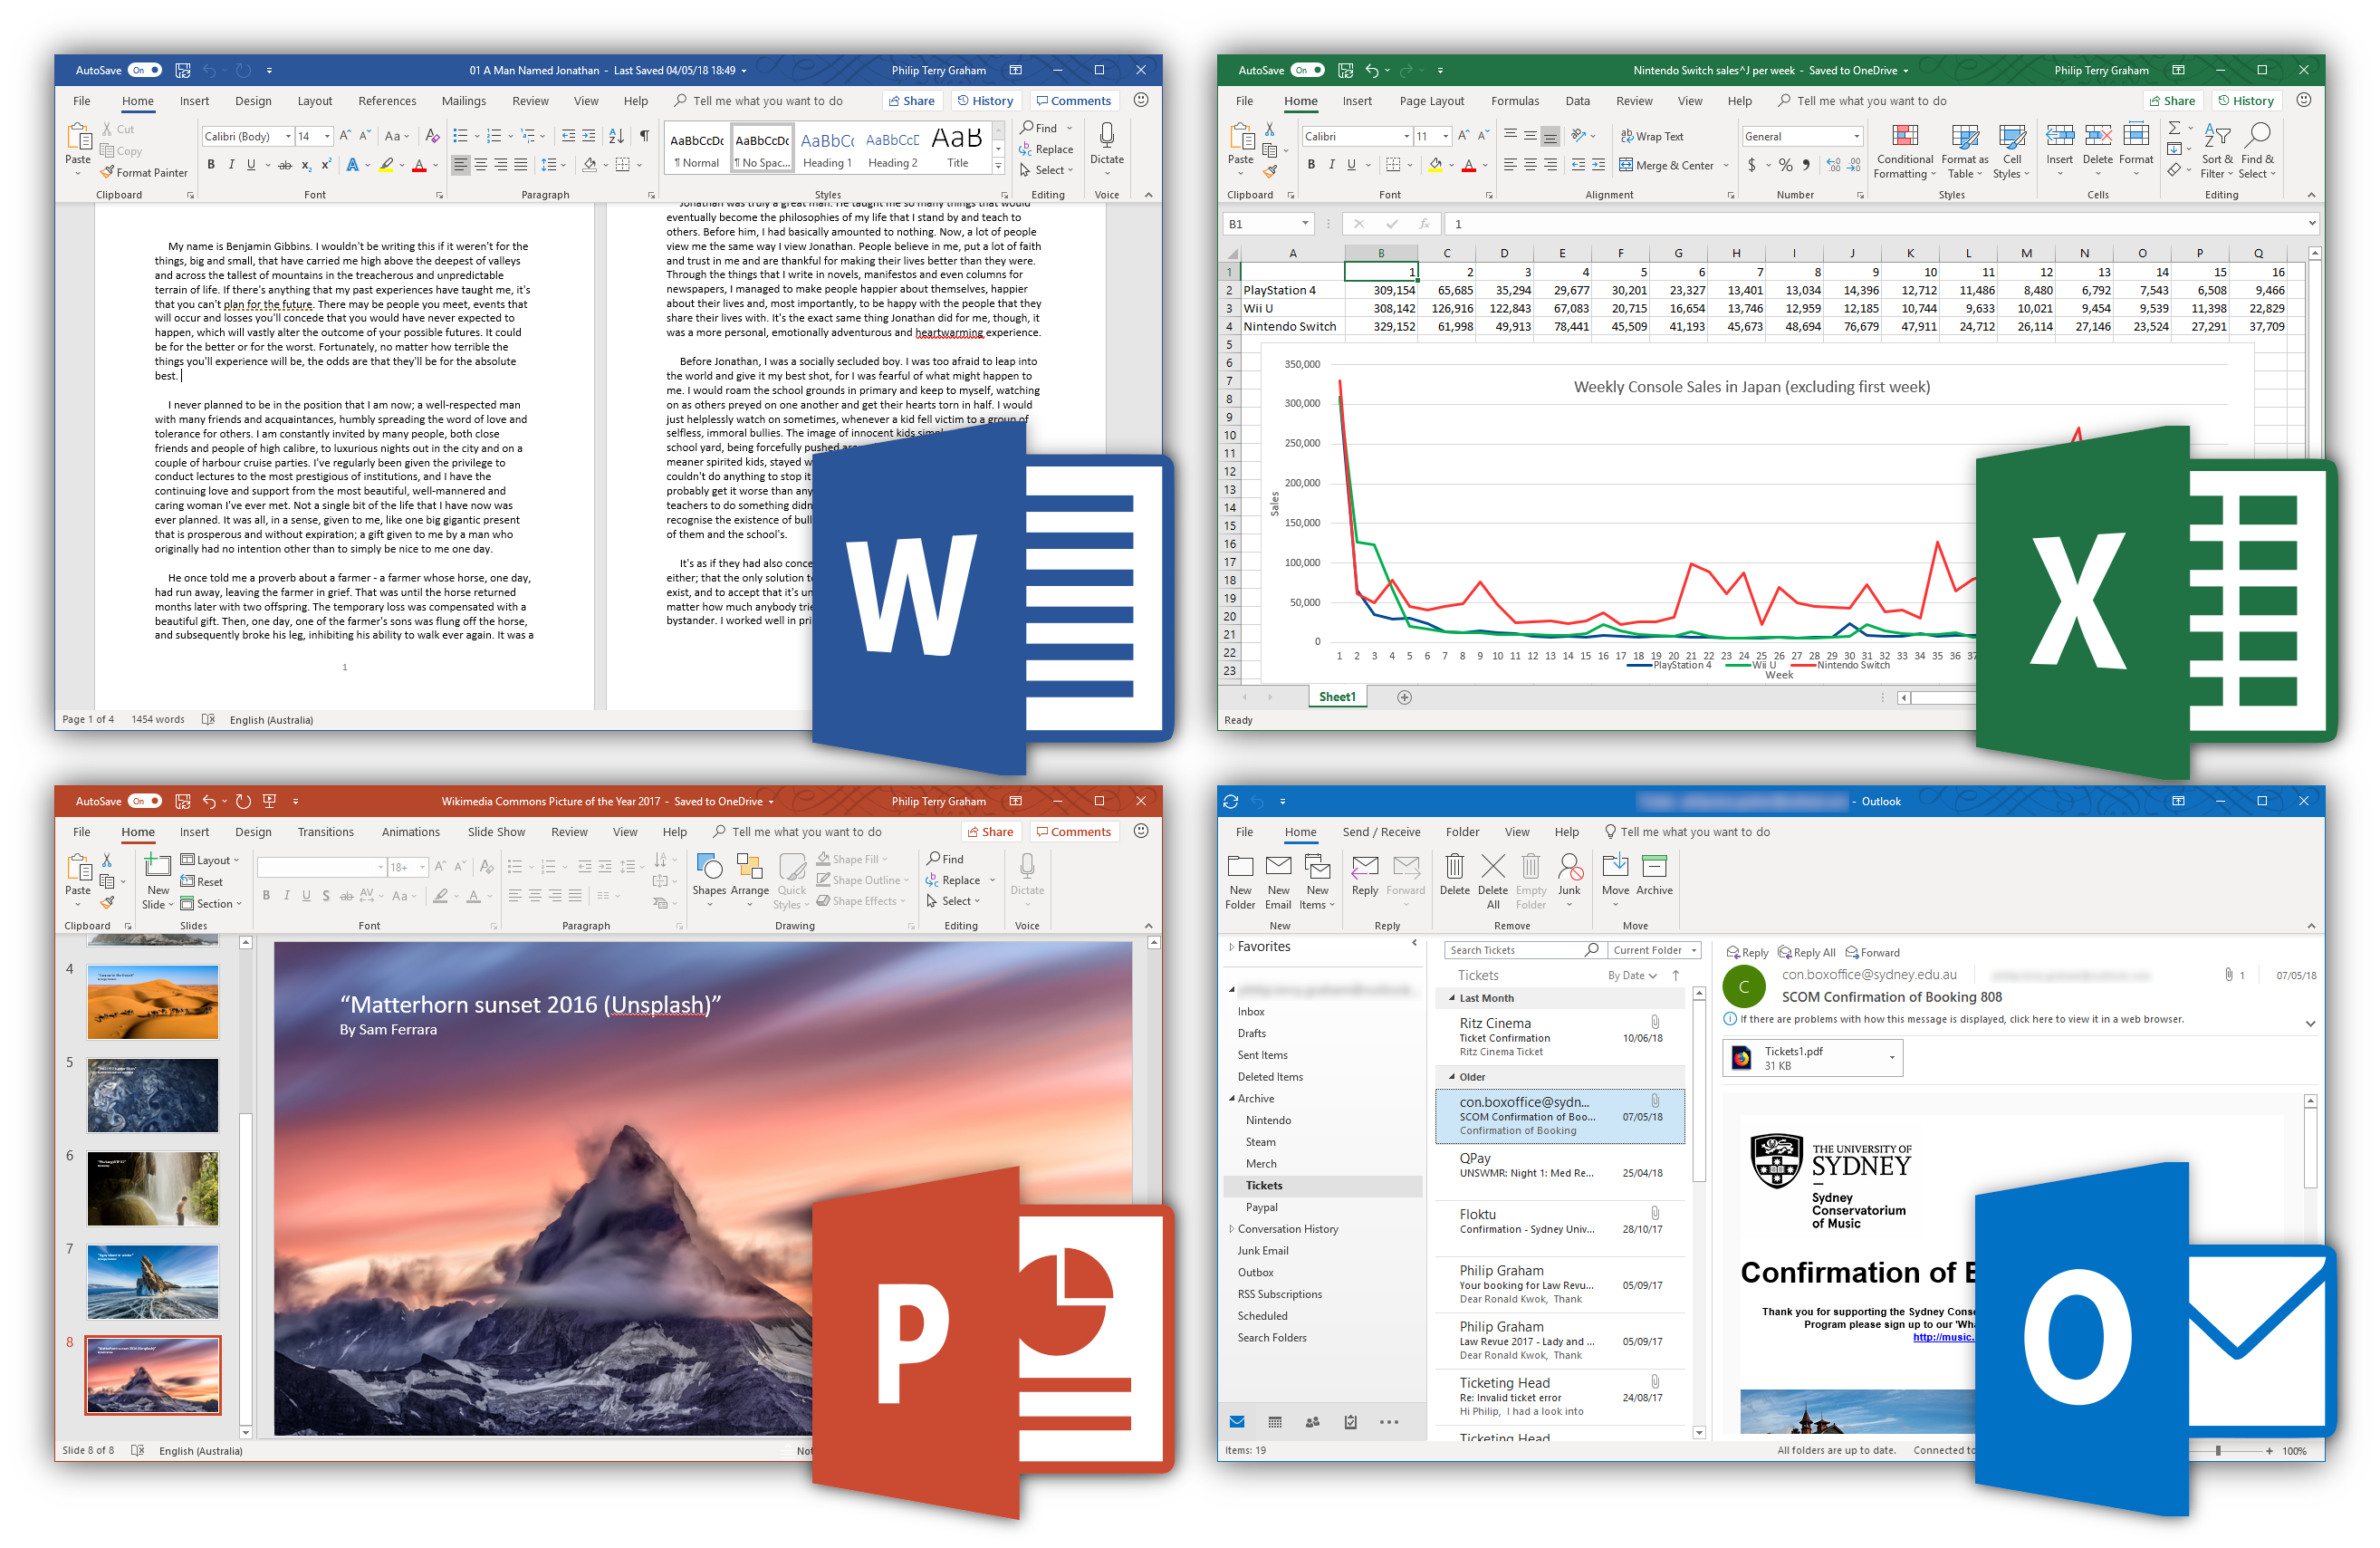 create a form in word version 16.15 for mac